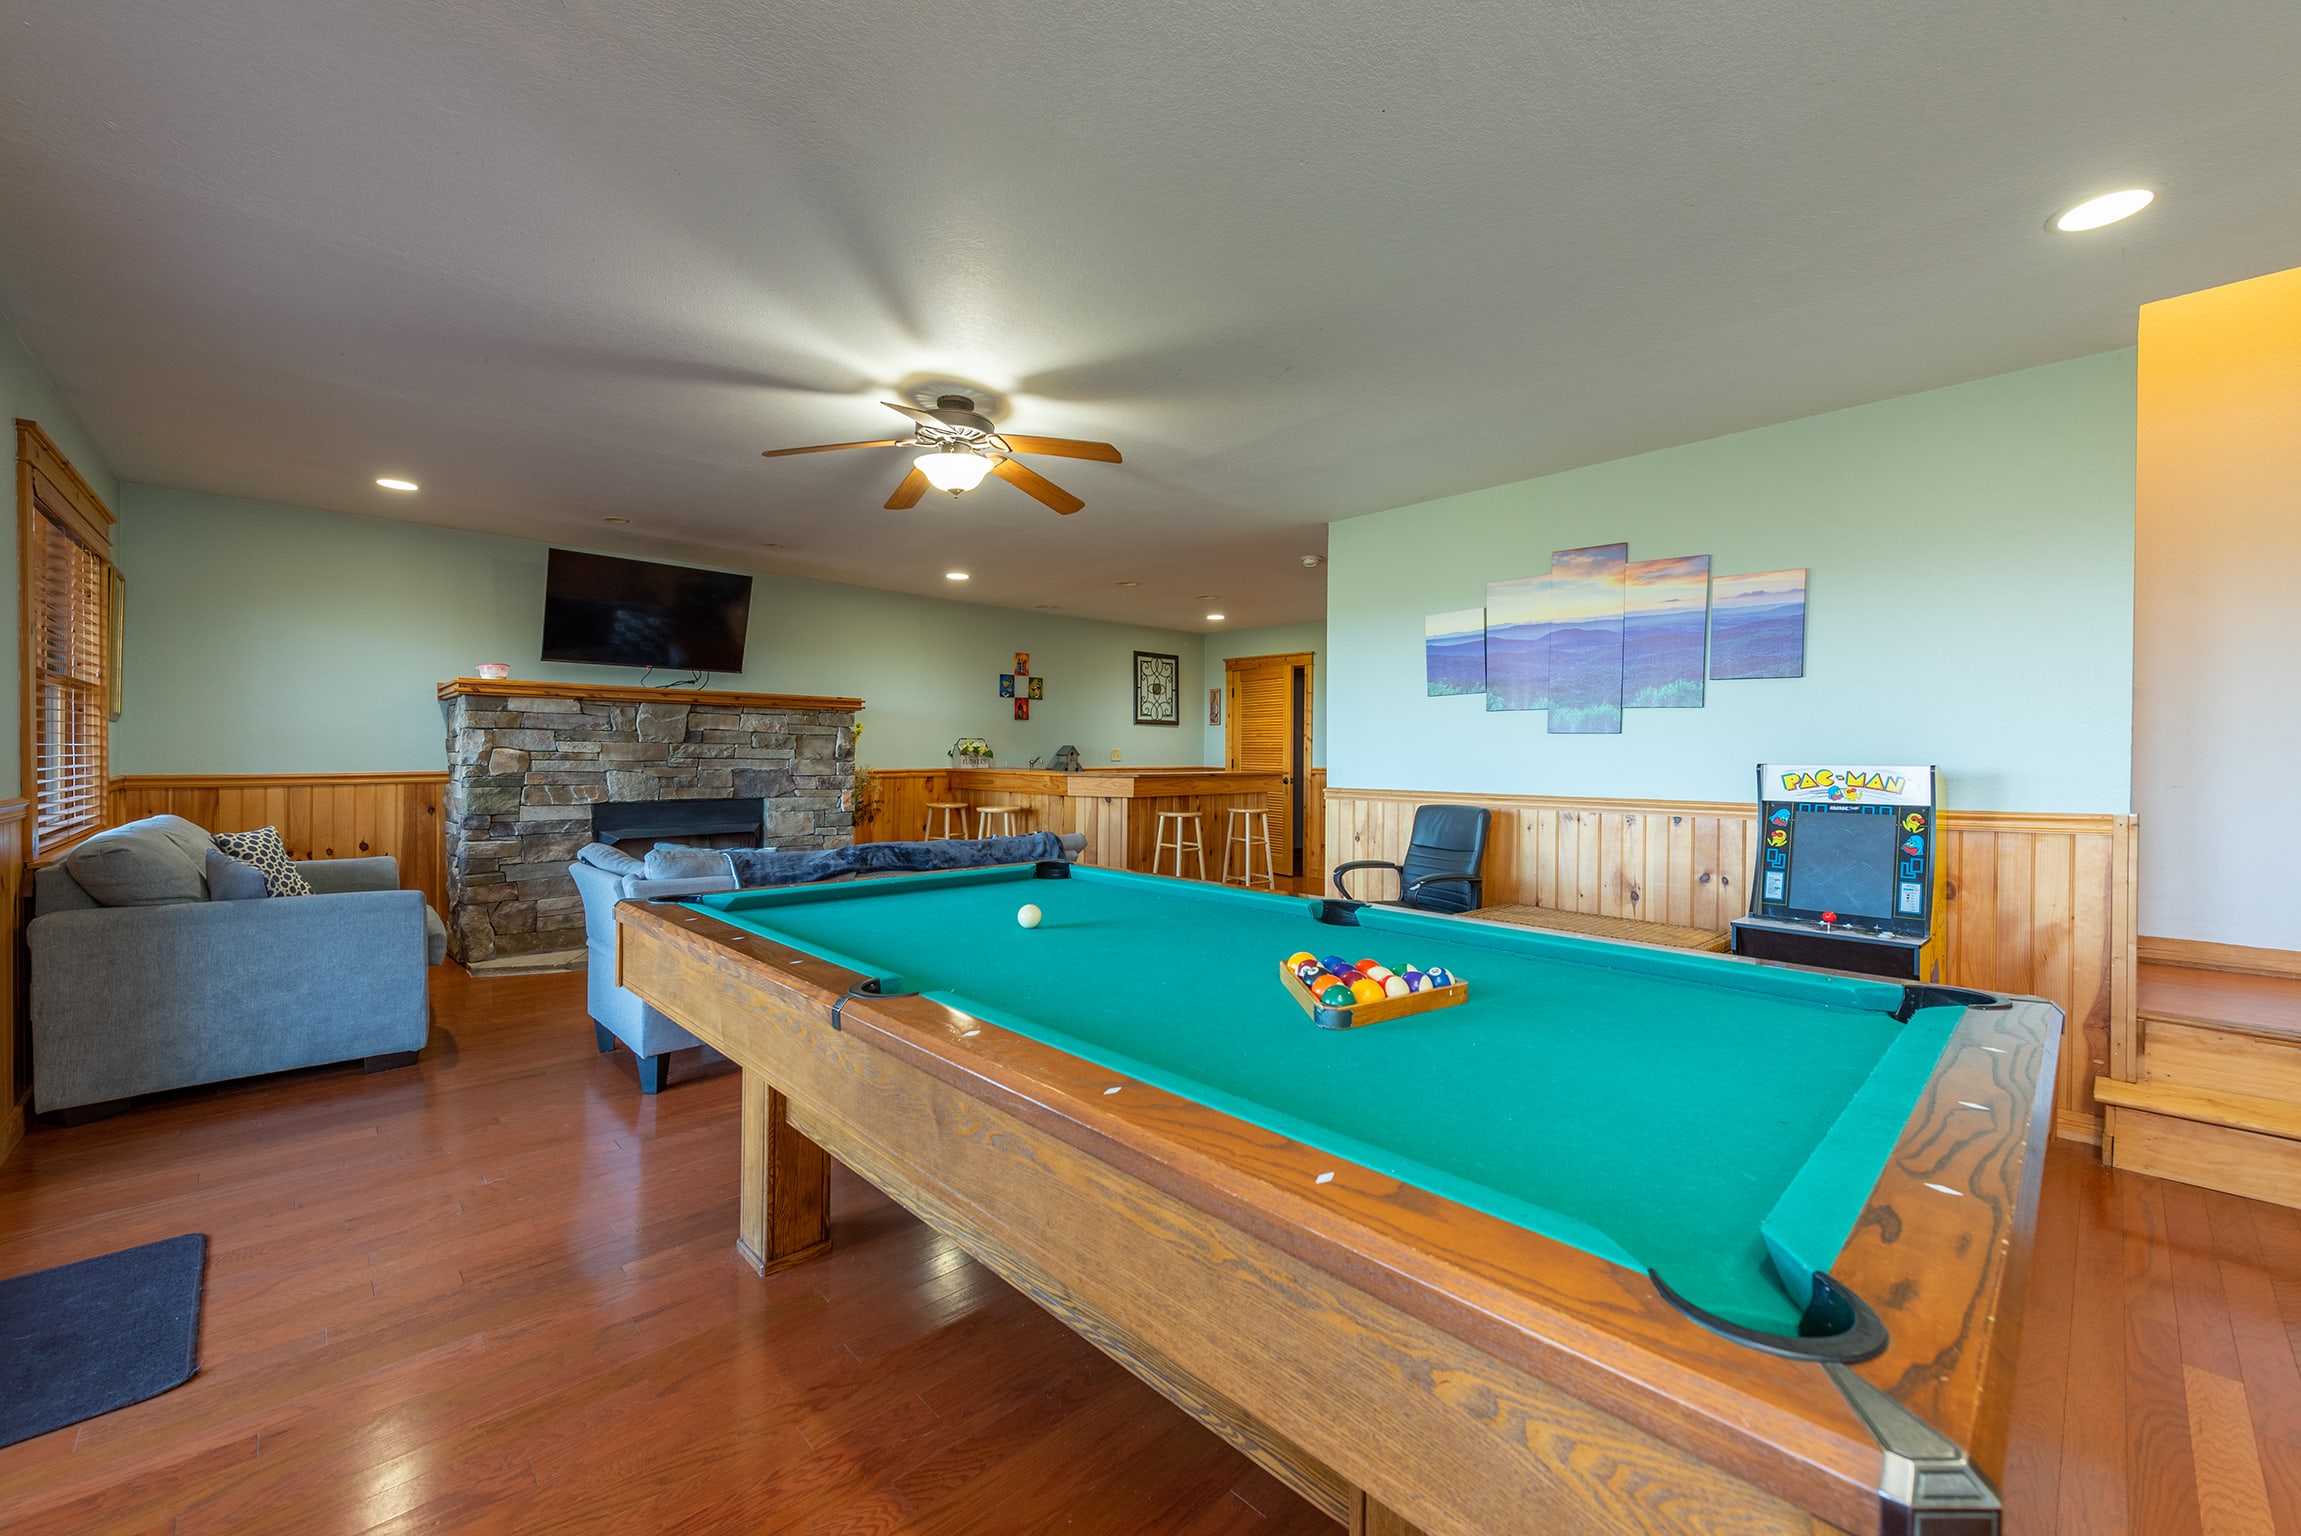 Play a game of pool in the game room!